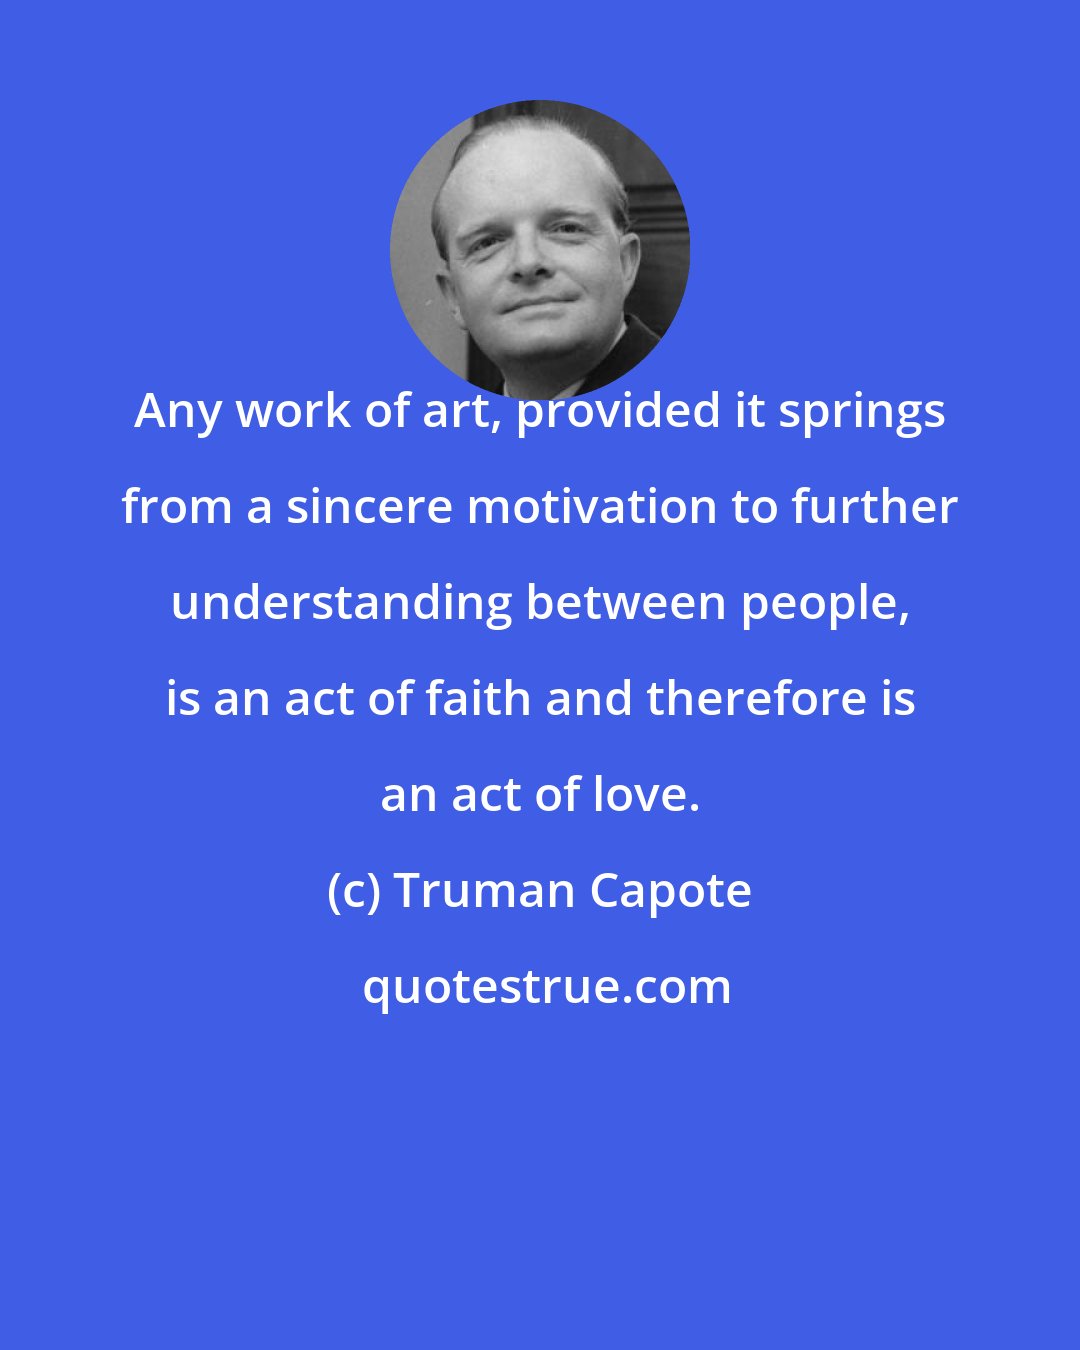 Truman Capote: Any work of art, provided it springs from a sincere motivation to further understanding between people, is an act of faith and therefore is an act of love.